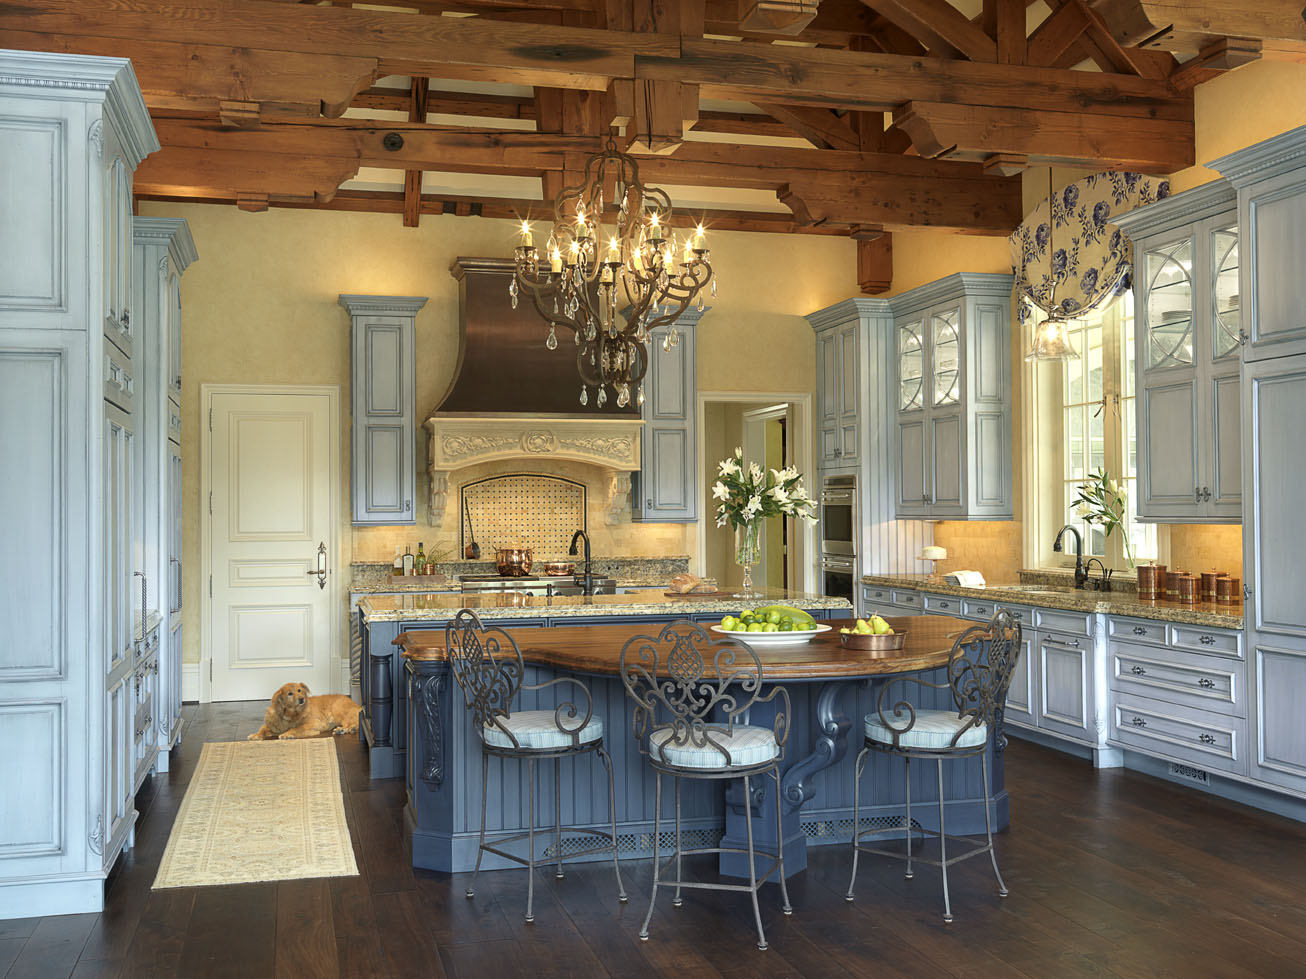 https://glenalspaughkitchens.com/wp-content/uploads/2020/03/French-Blue-kitchen-overall-Alise-OBrien-Photography-website-copy.jpg